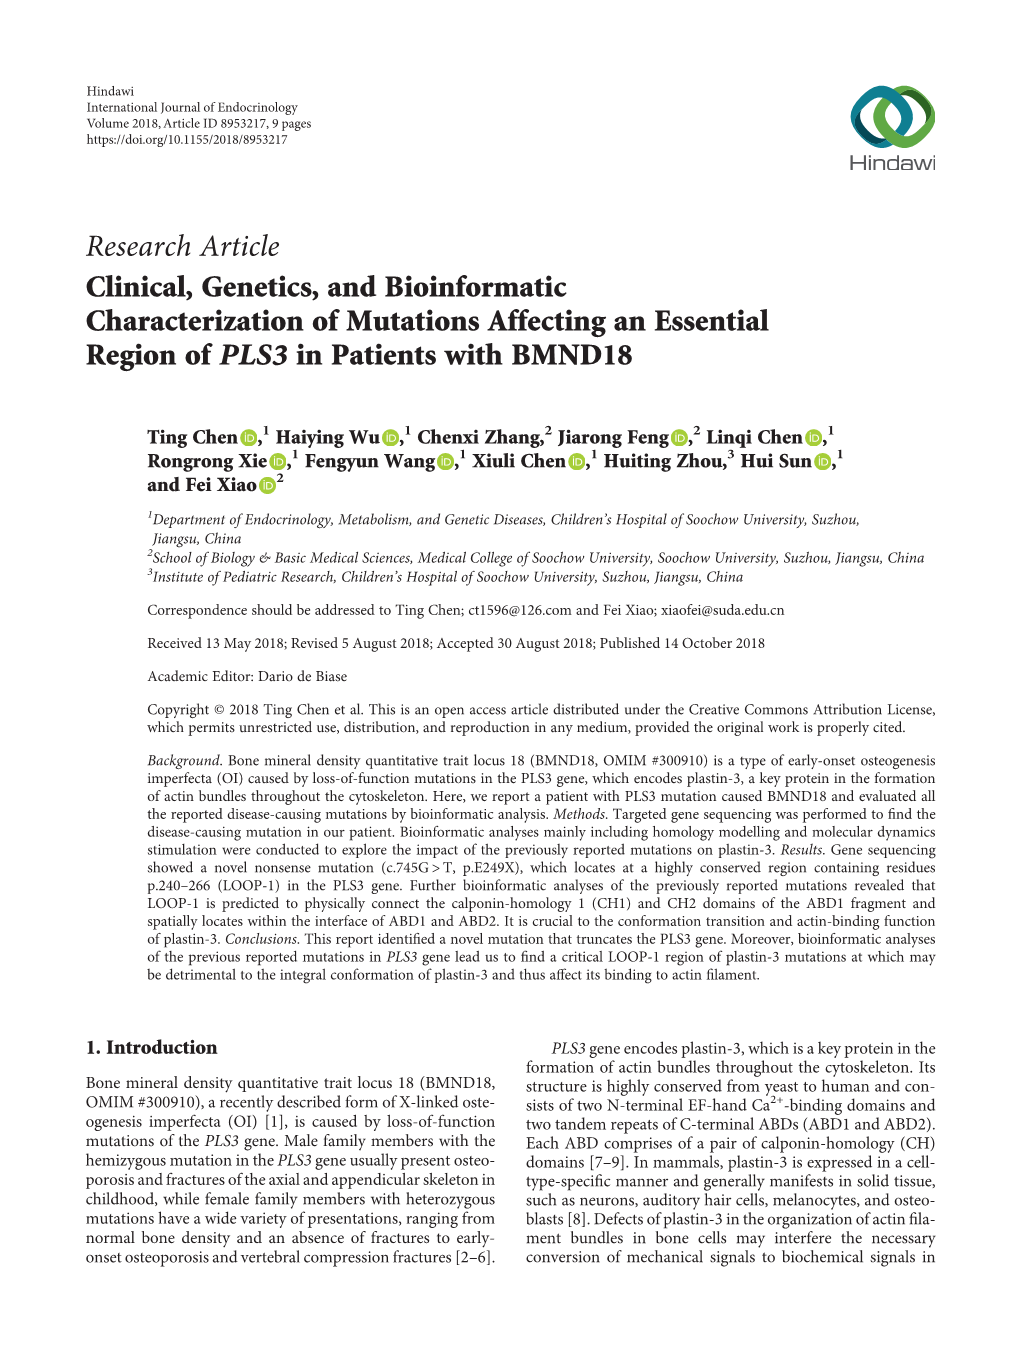 Clinical, Genetics, and Bioinformatic Characterization of Mutations Affecting an Essential Region of PLS3 in Patients with BMND18